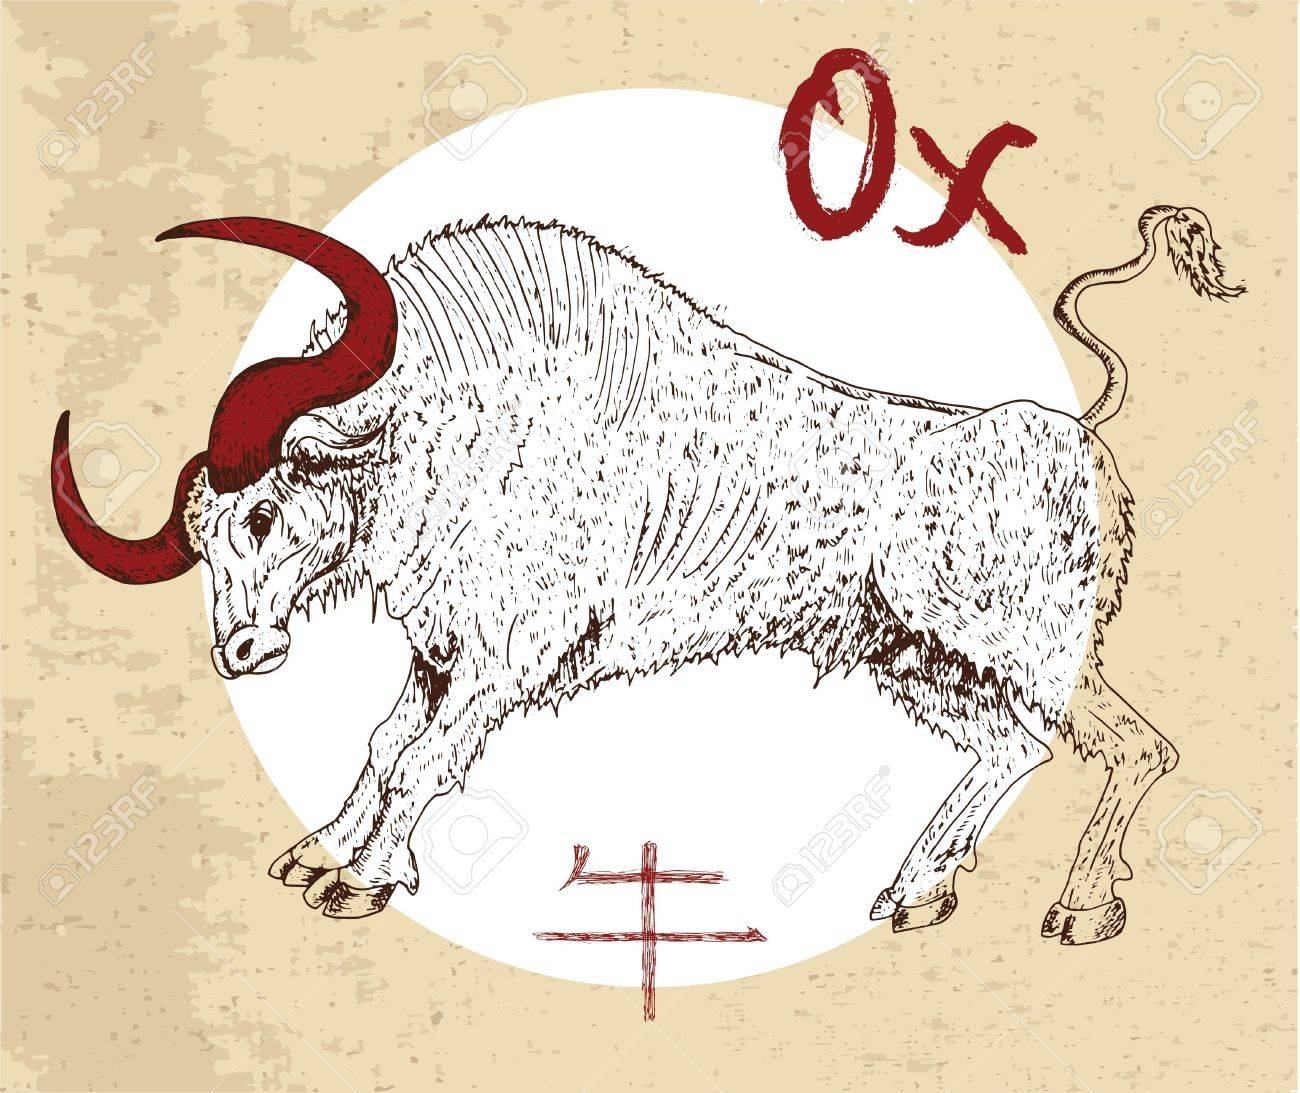 Chinese Zodiac Symbol Of Hand Drawn Ox Or Bull With Lettering